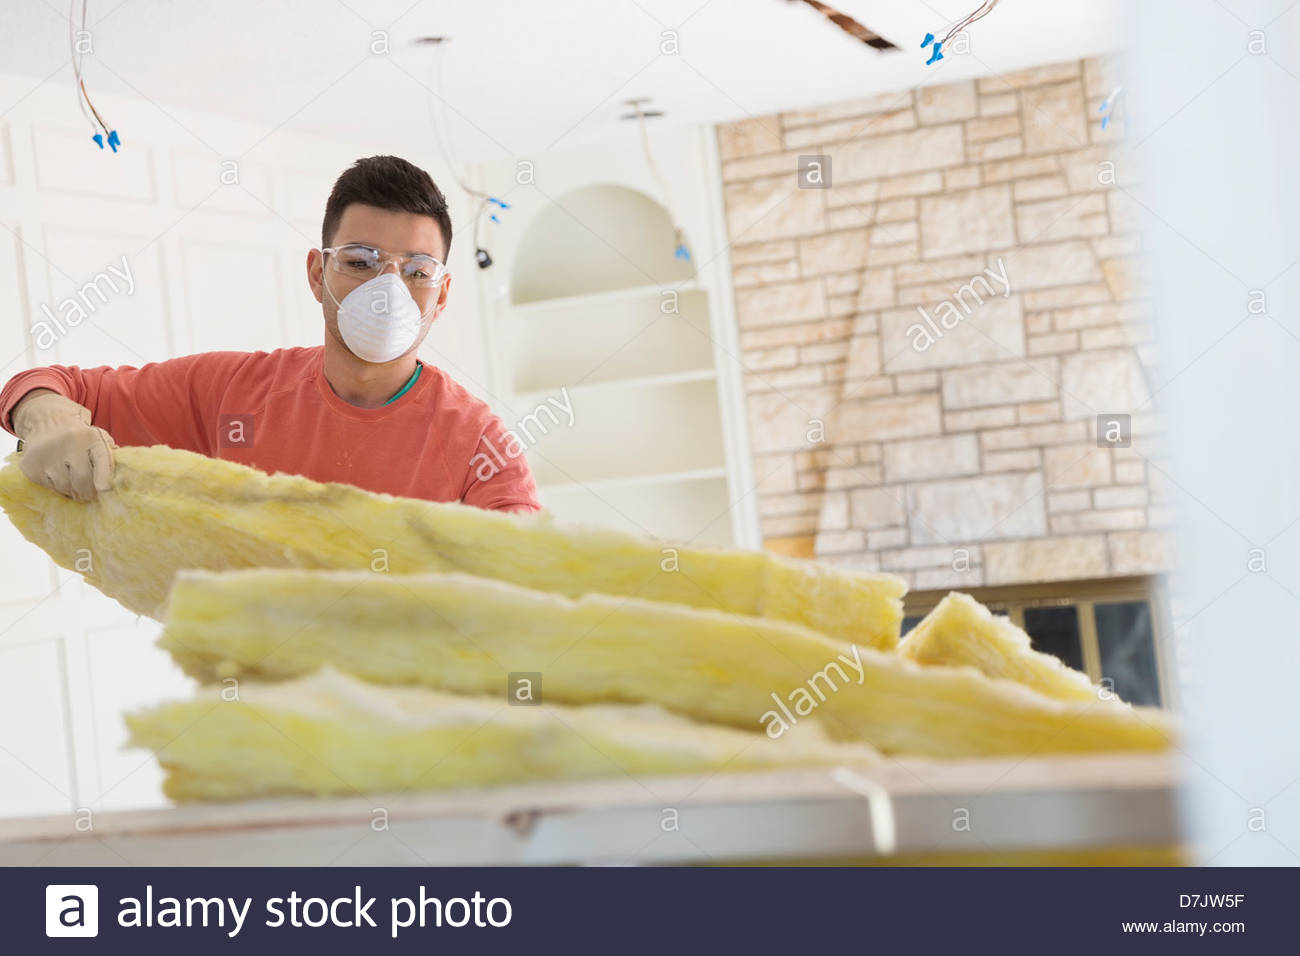 Young man installing insulation at home Stock Photo